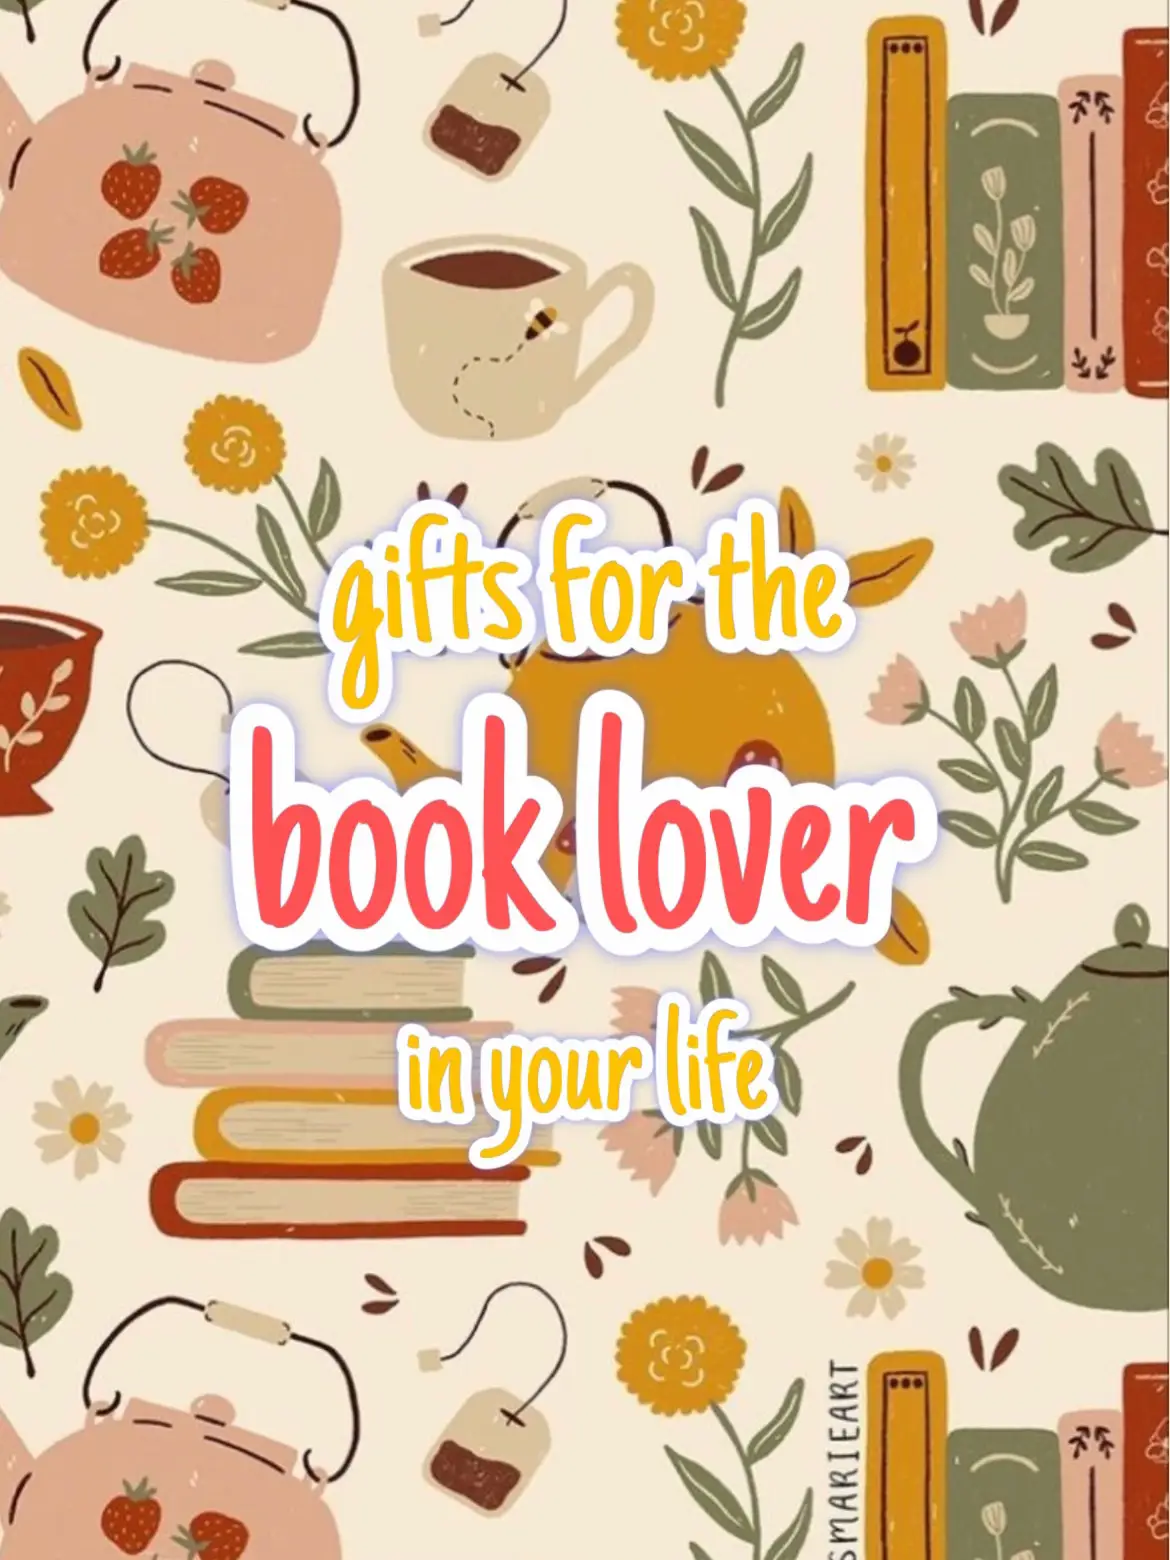  A collage of books and flowers with the words "Gifts for the Book lover" and "In your life" written above it.